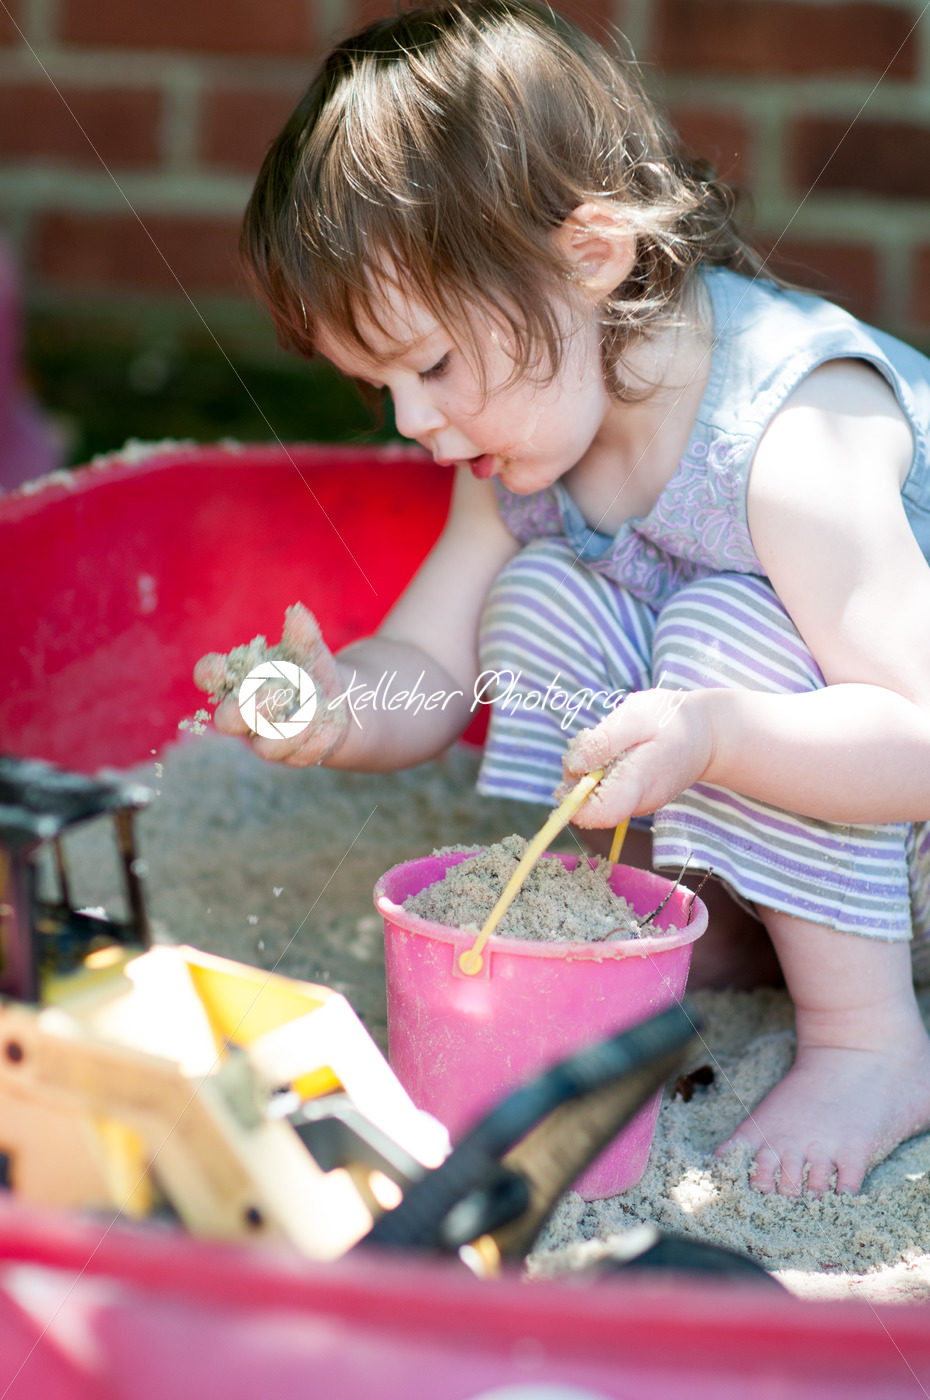 Adorable little girl playing in a sandbox - Kelleher Photography Store